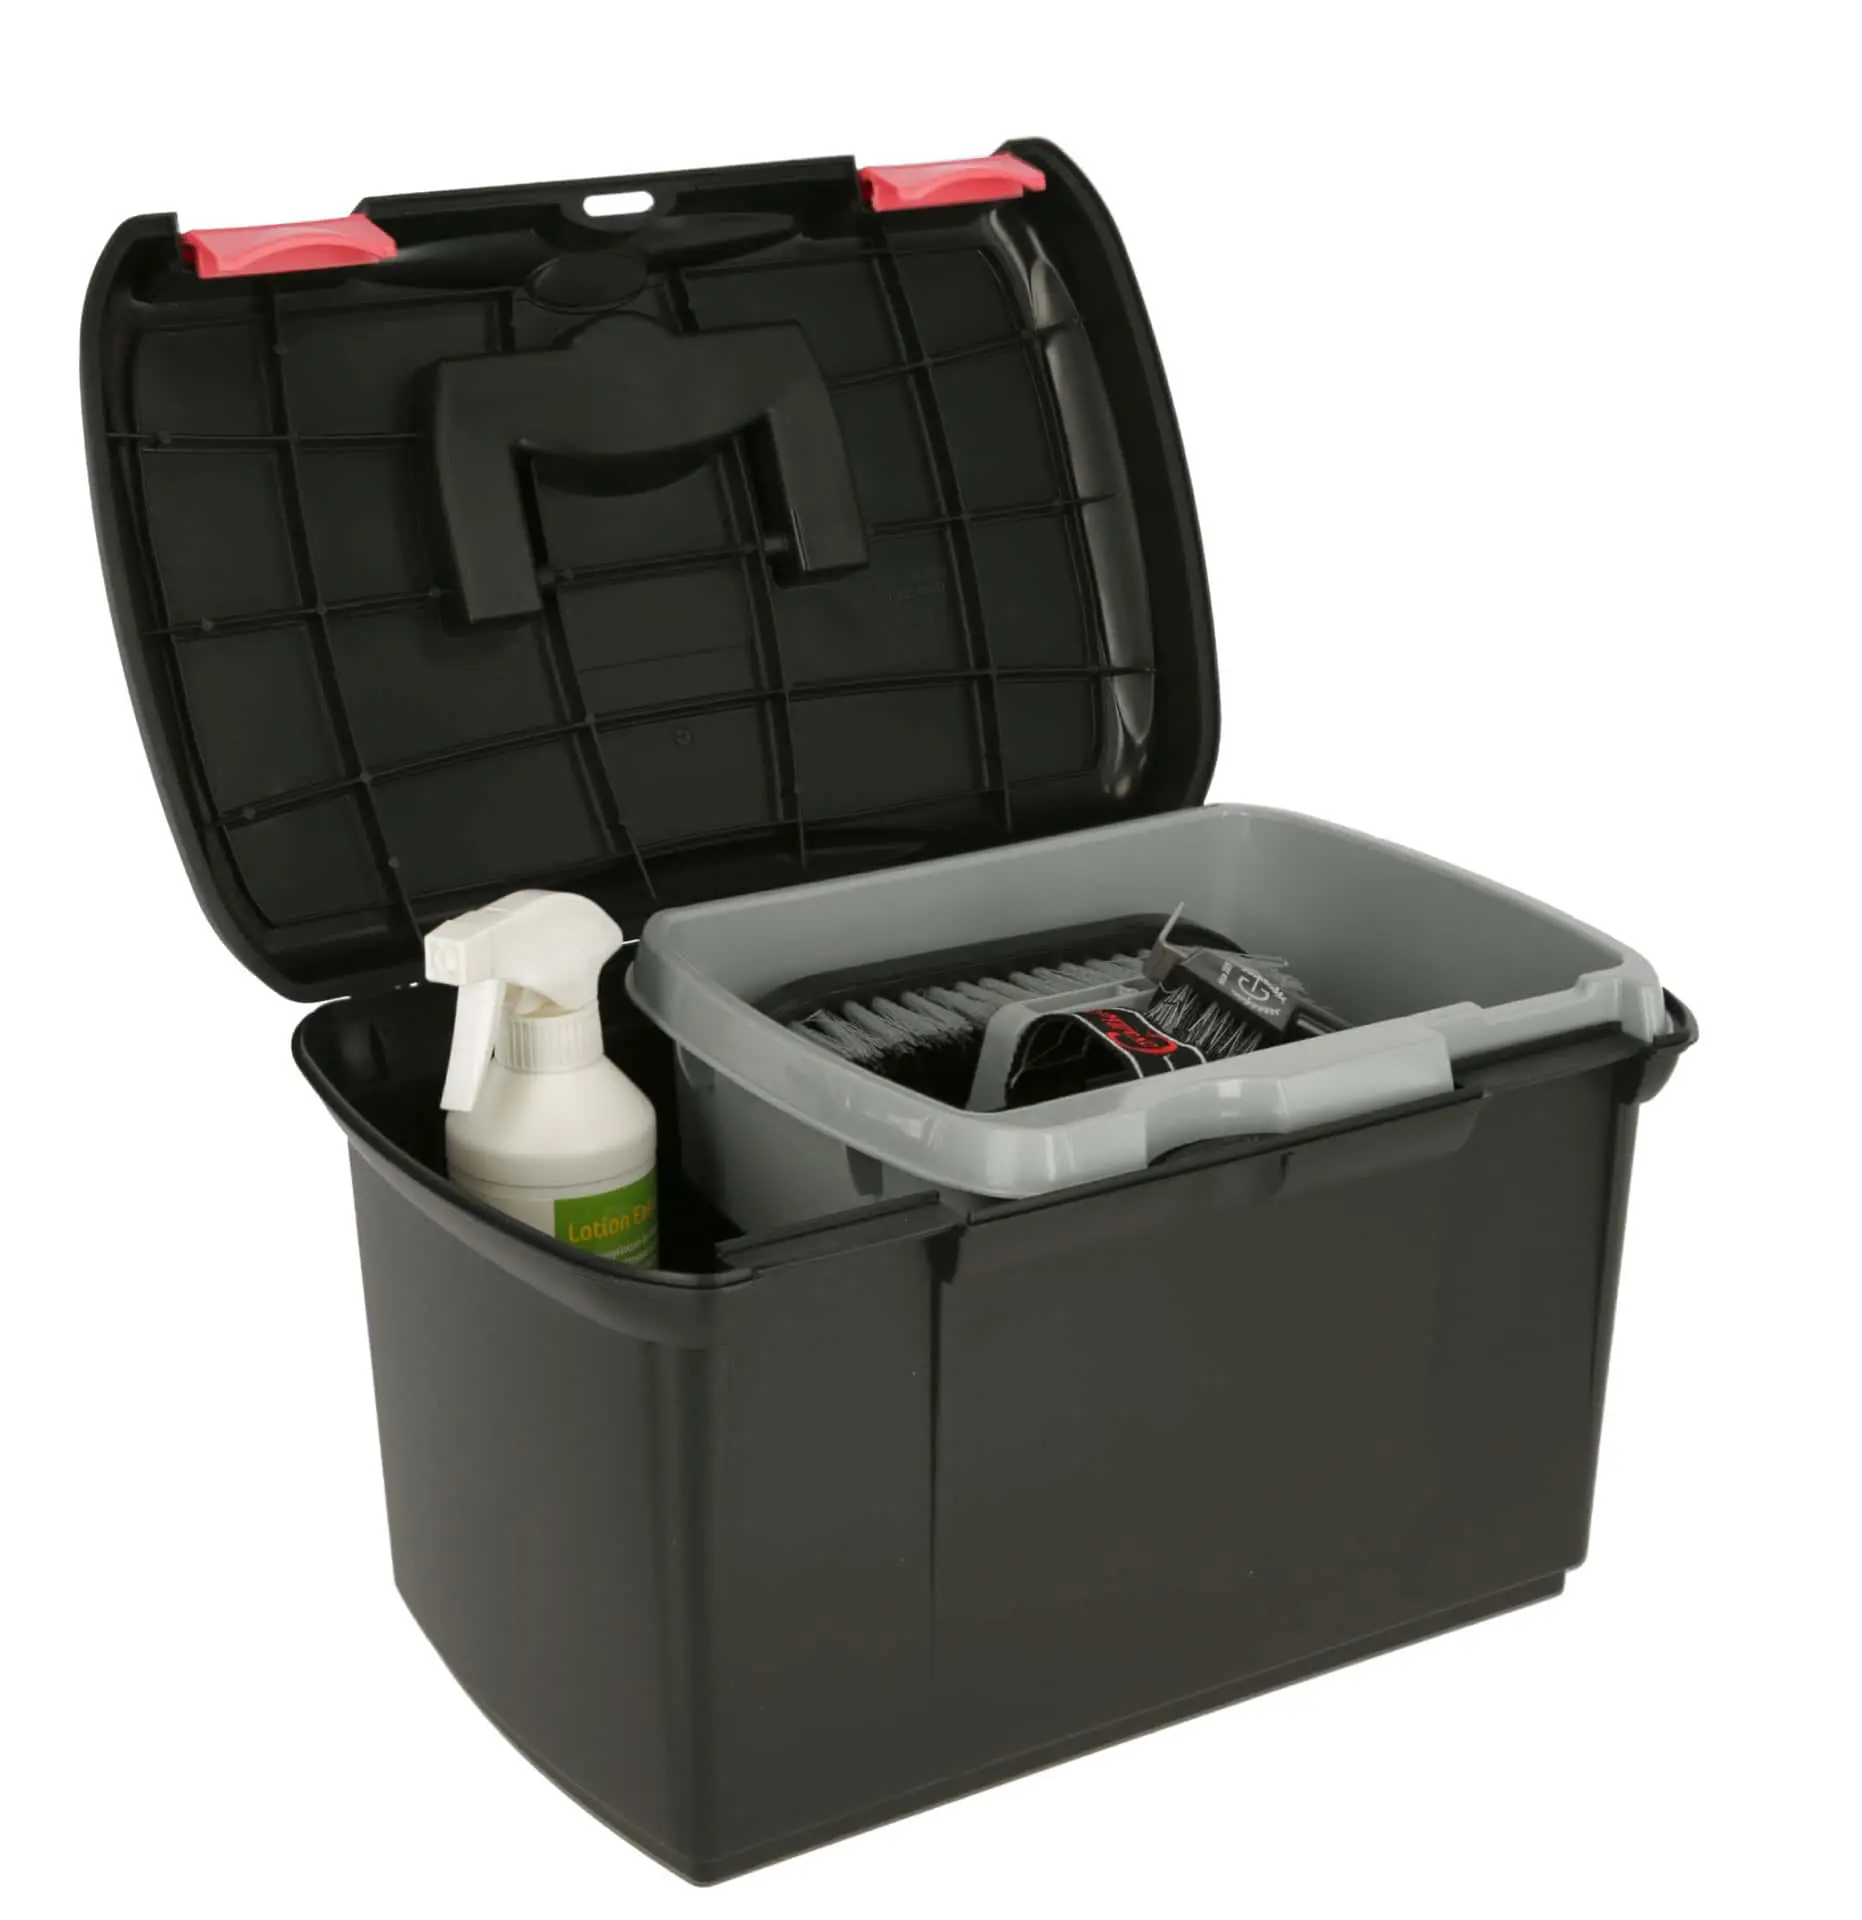 Grooming Box Arrezzo blck/fchs with Removable Insert